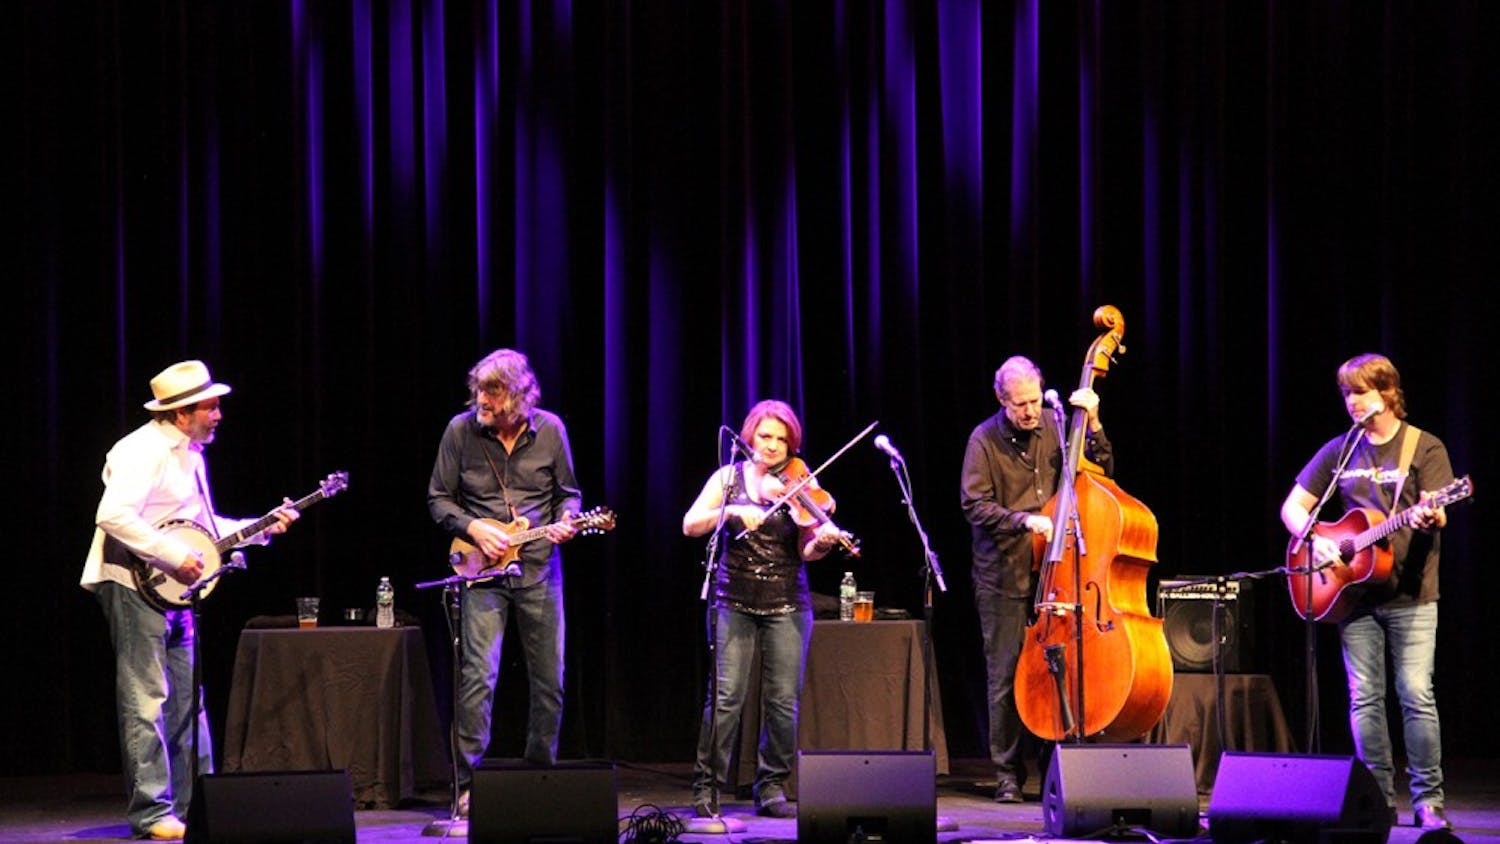 SteelDrivers perform country songs at the Burskirk-Chumley Theater Sunday. In 2009, the band was nominated for a Grammy in the category of best country performance by a duo or group with vocals for “Blue Side of the Mountain,” along with Sugarland, Rascal Flatts, Brooks & Dunn, and Lady Antebellum.